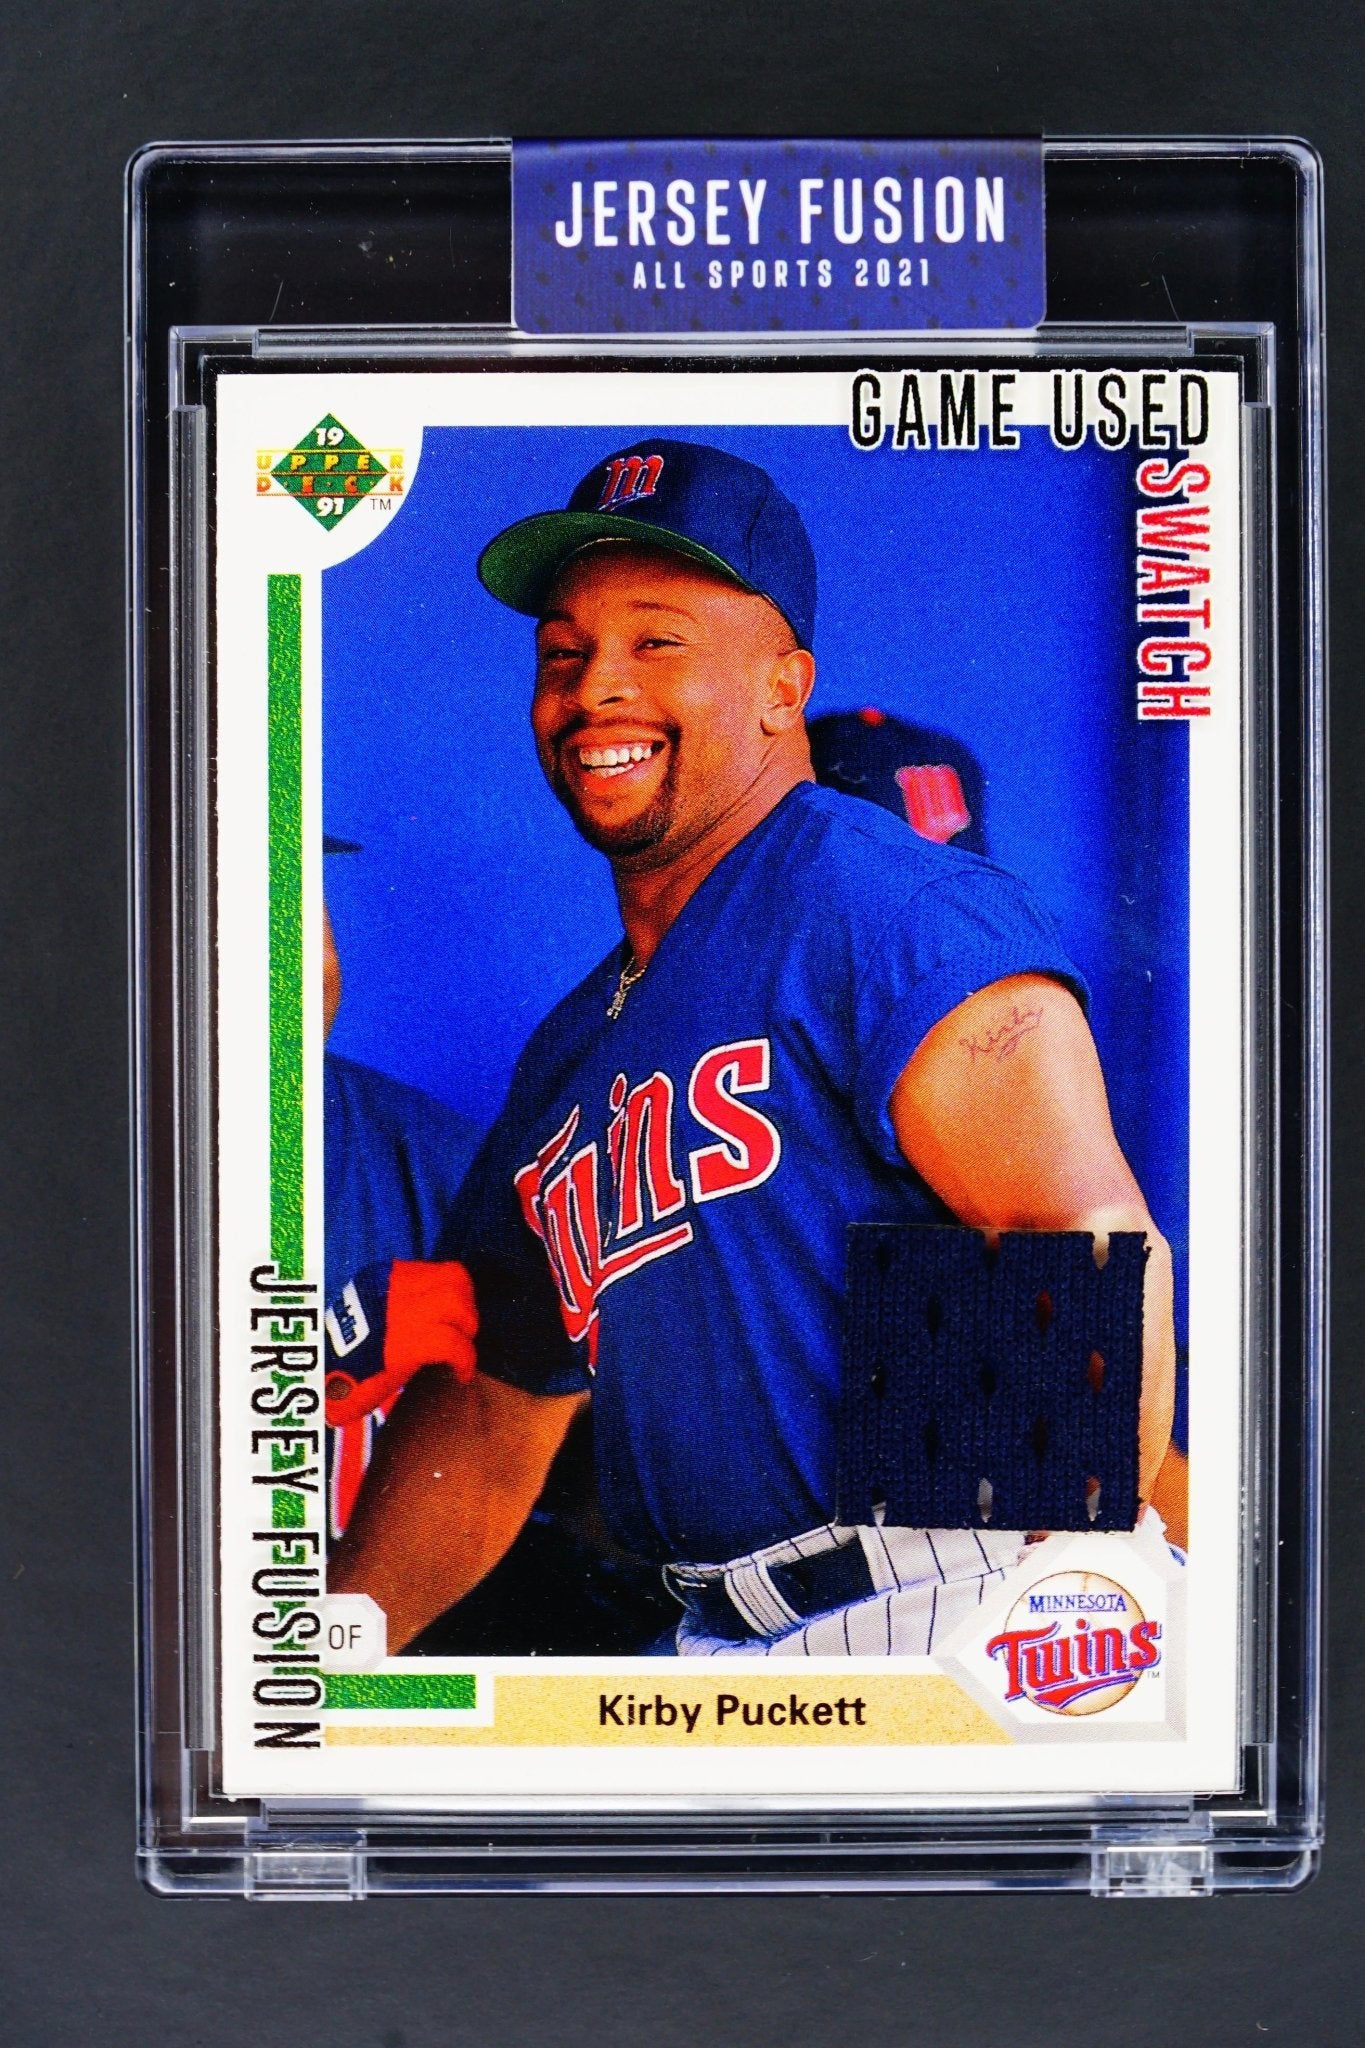 Baseball card: Kirby Puckett game used swatch 1990's - THE CARD SPOT PTY LTD.Sports CardJersey Fusion